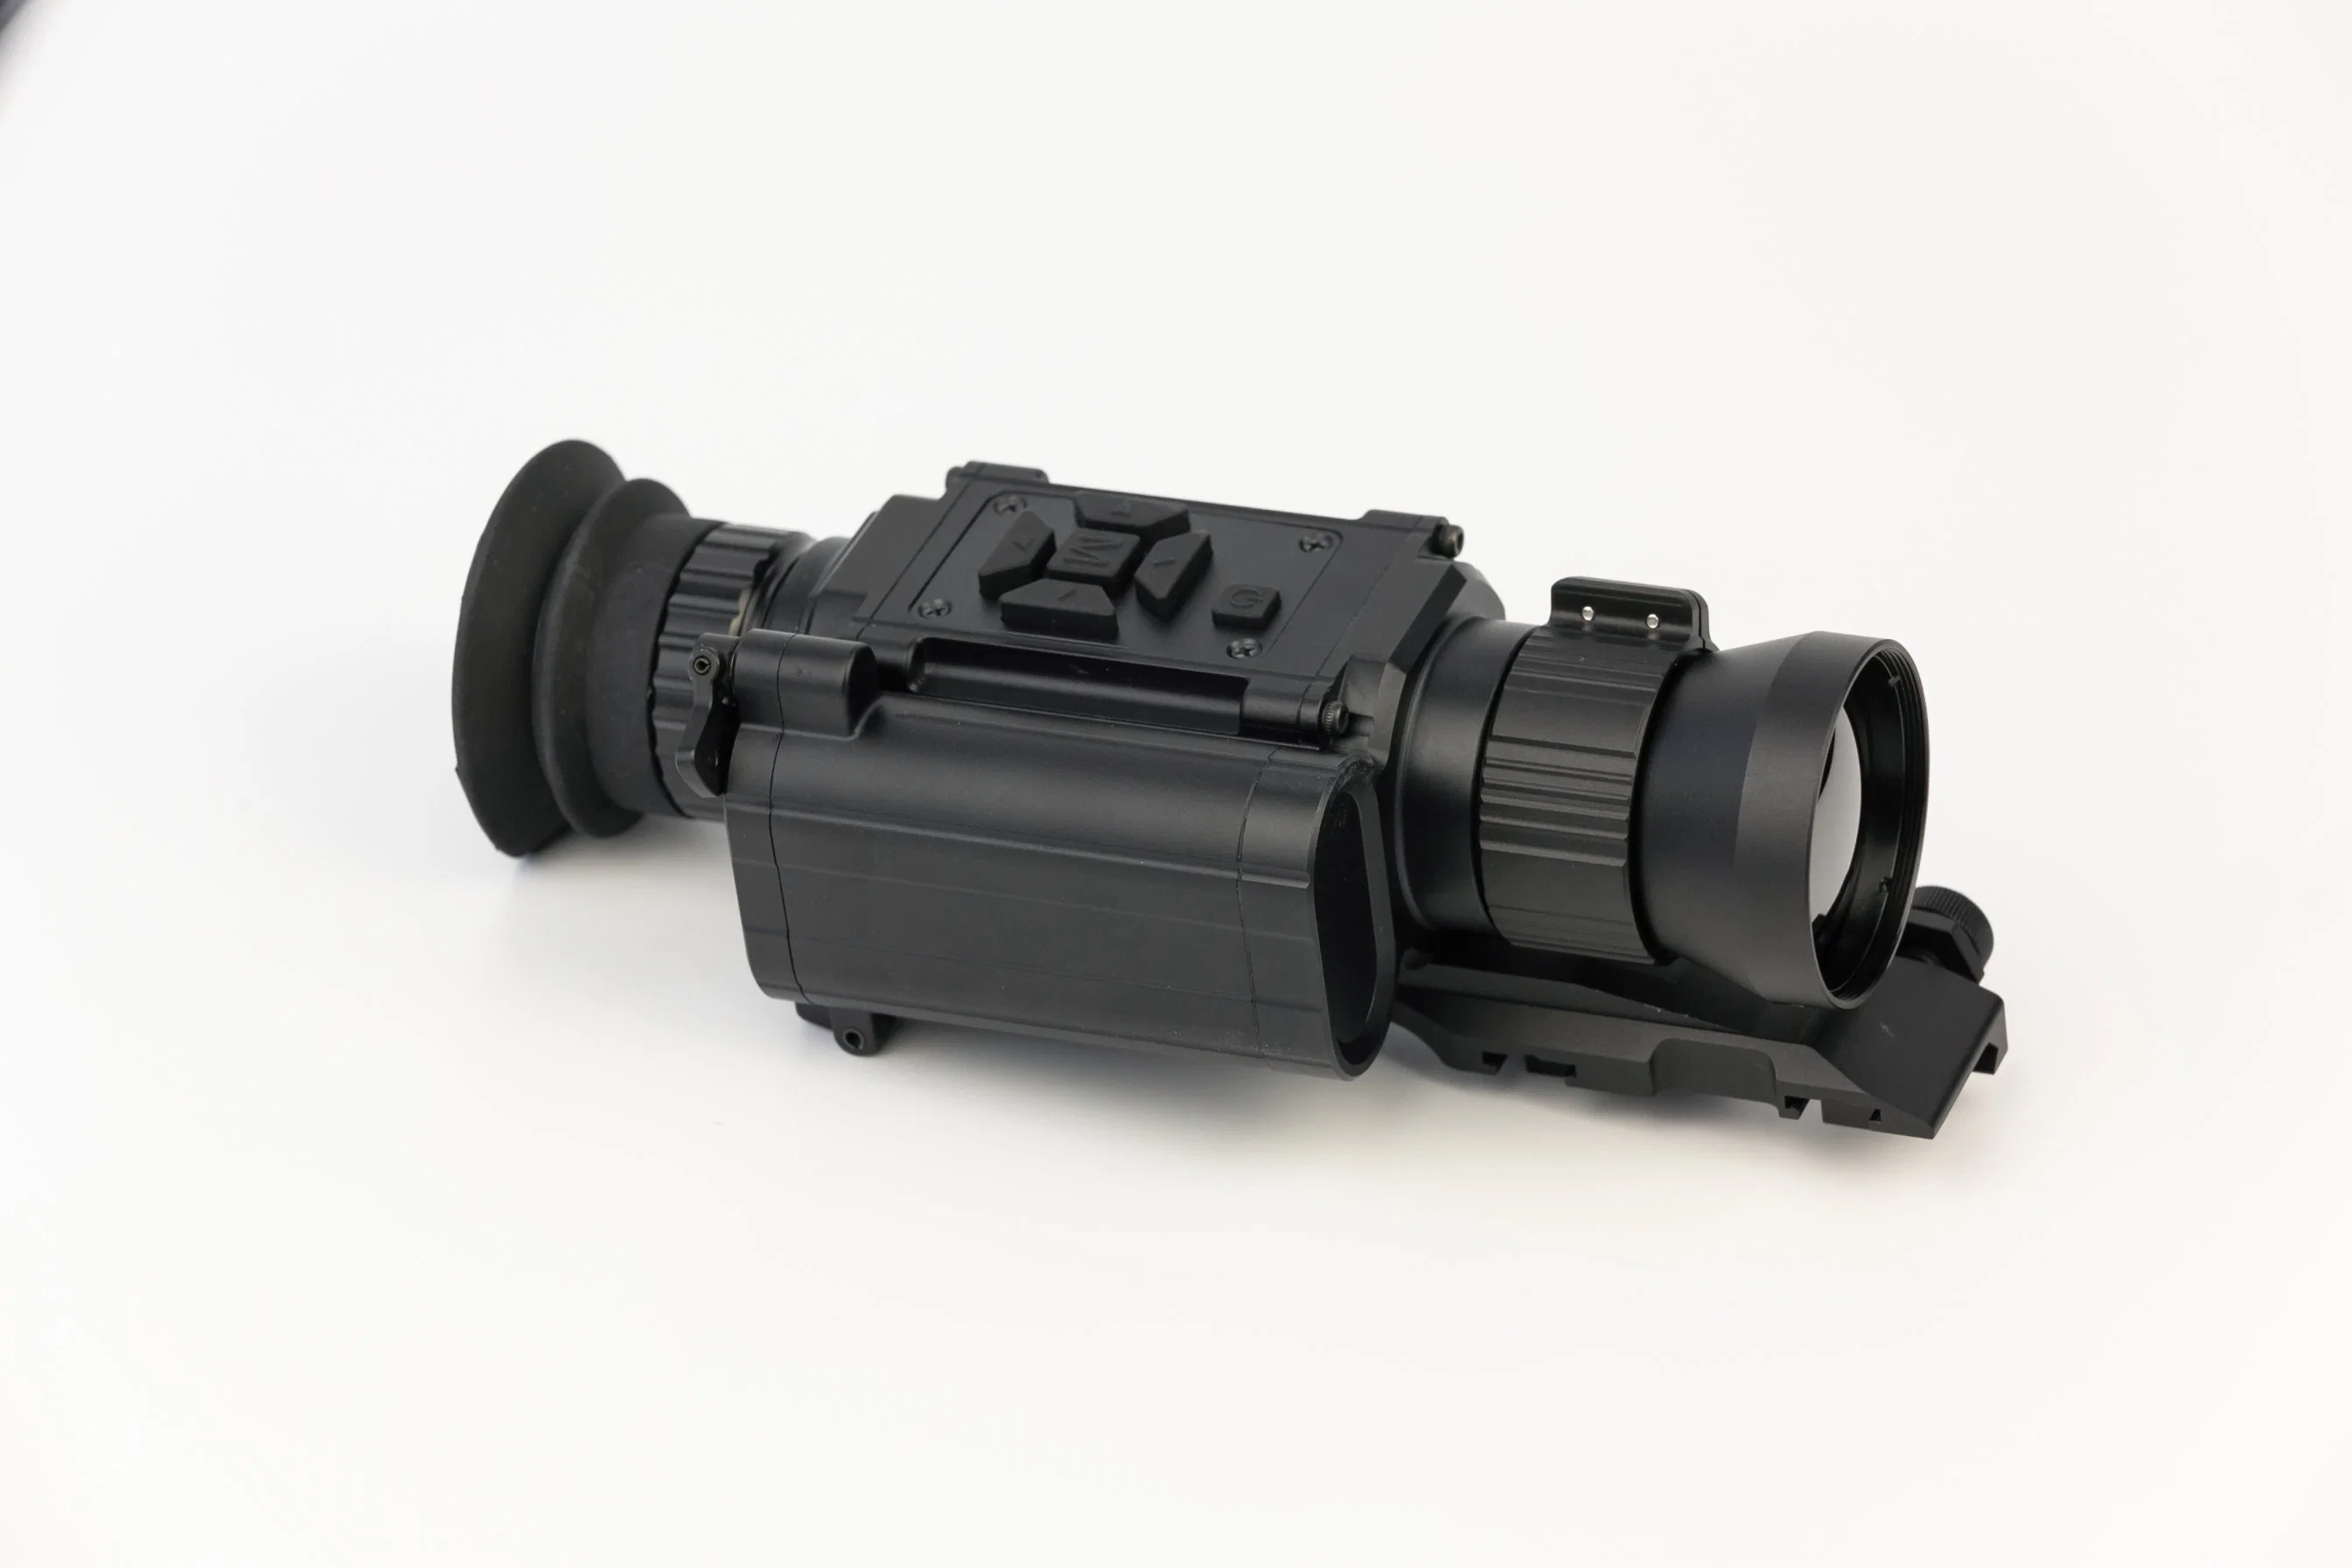 Jy-Sc5a 384*288 Adjustable Diopter for Monocular Display Night Vision Thermal Imaging Aiming Scope